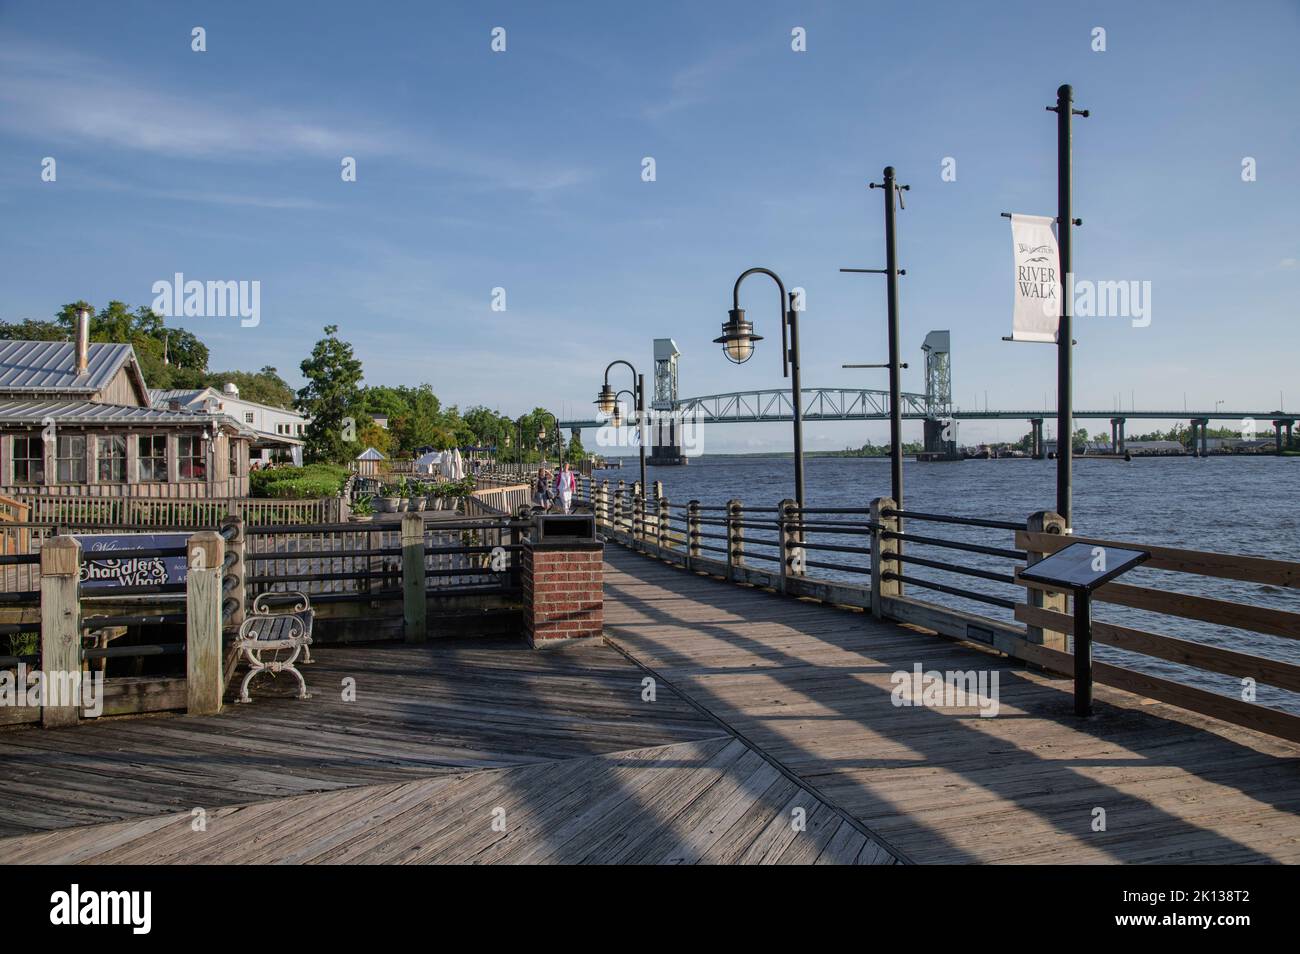 Sunset on the Riverwalk along the Cape Fear River with river bridge in the background, Wilmington, North Carolina, United States of America Stock Photo